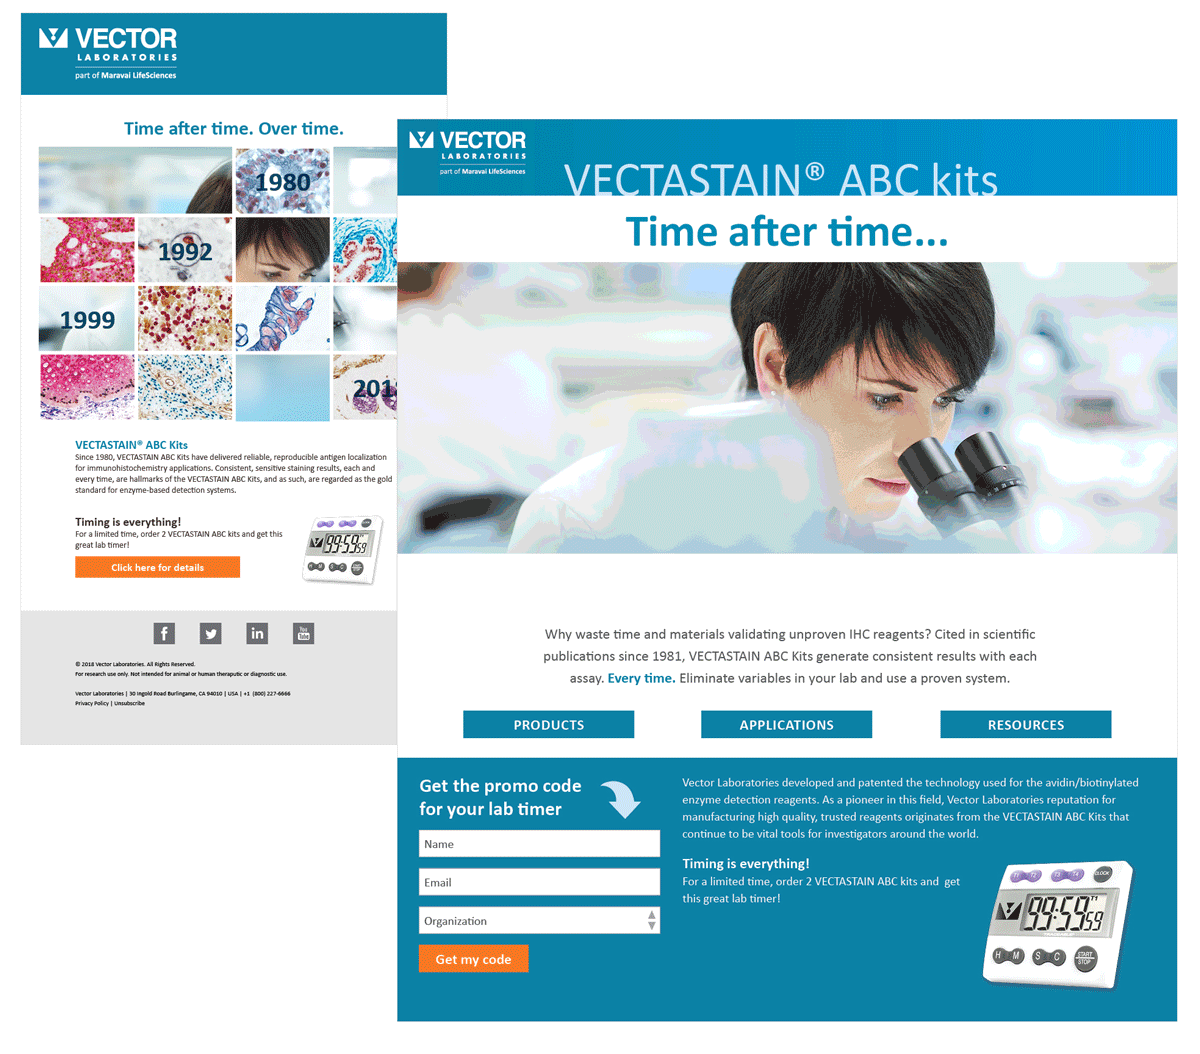 Vectastain landing page